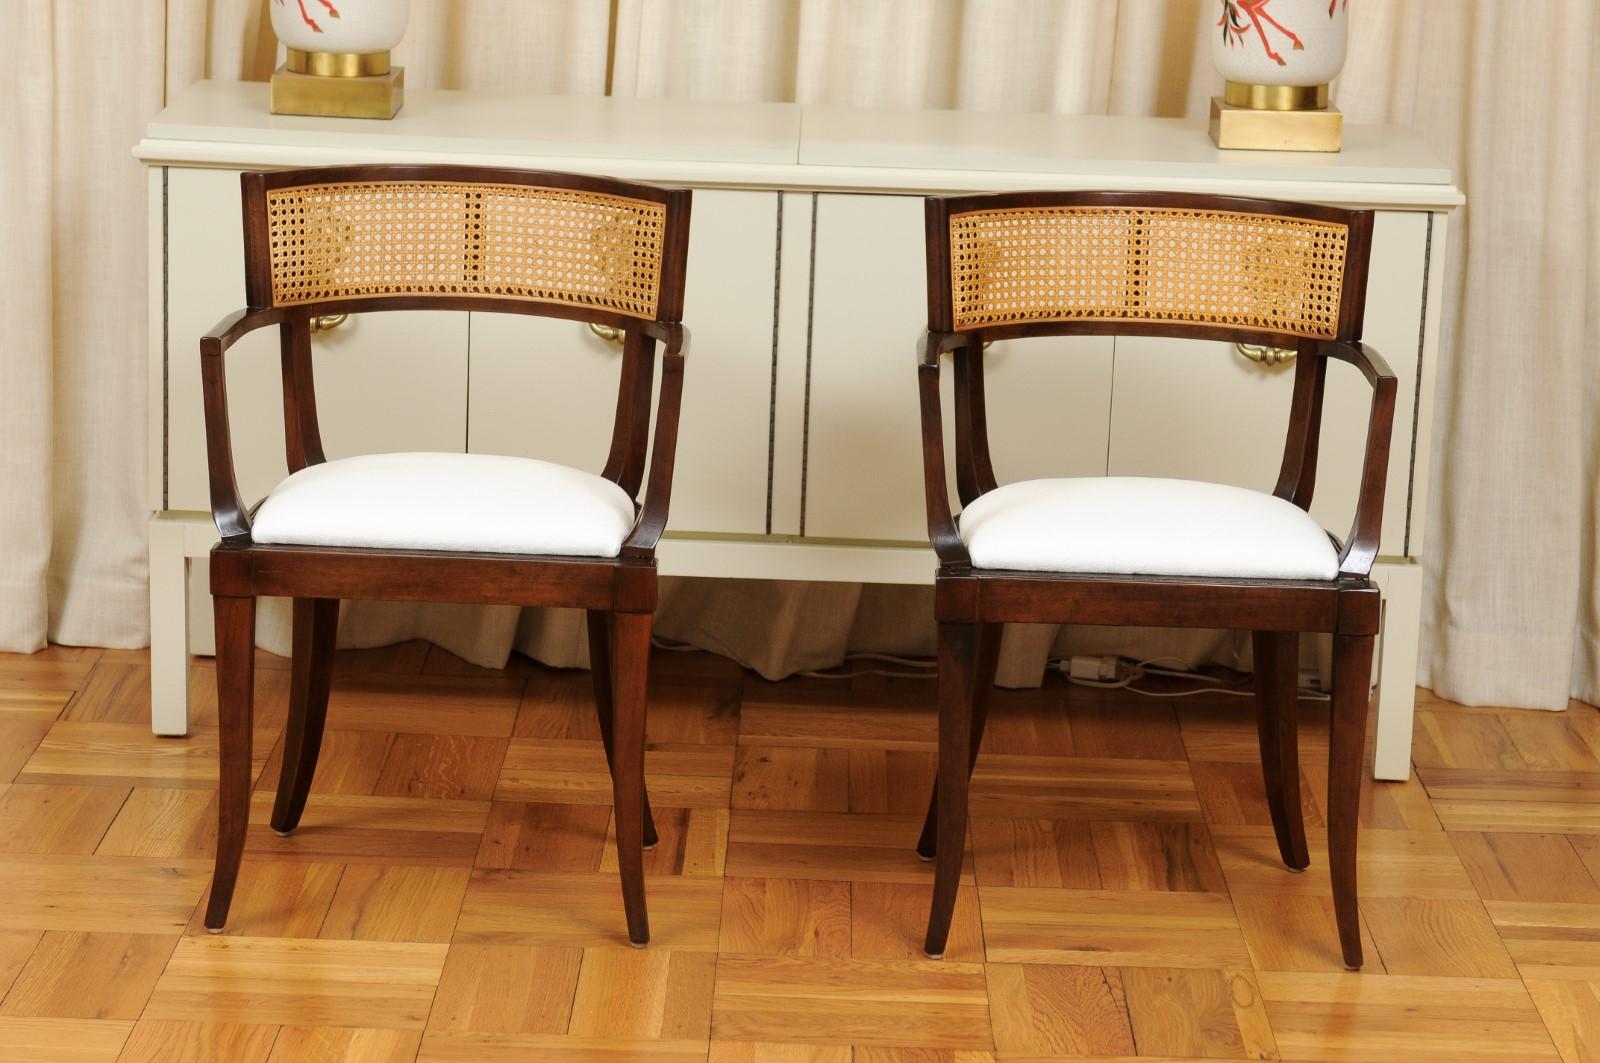 All Arm, Exquisite Set of 8 Klismos Cane Dining Chairs by Baker, circa 1958 For Sale 5